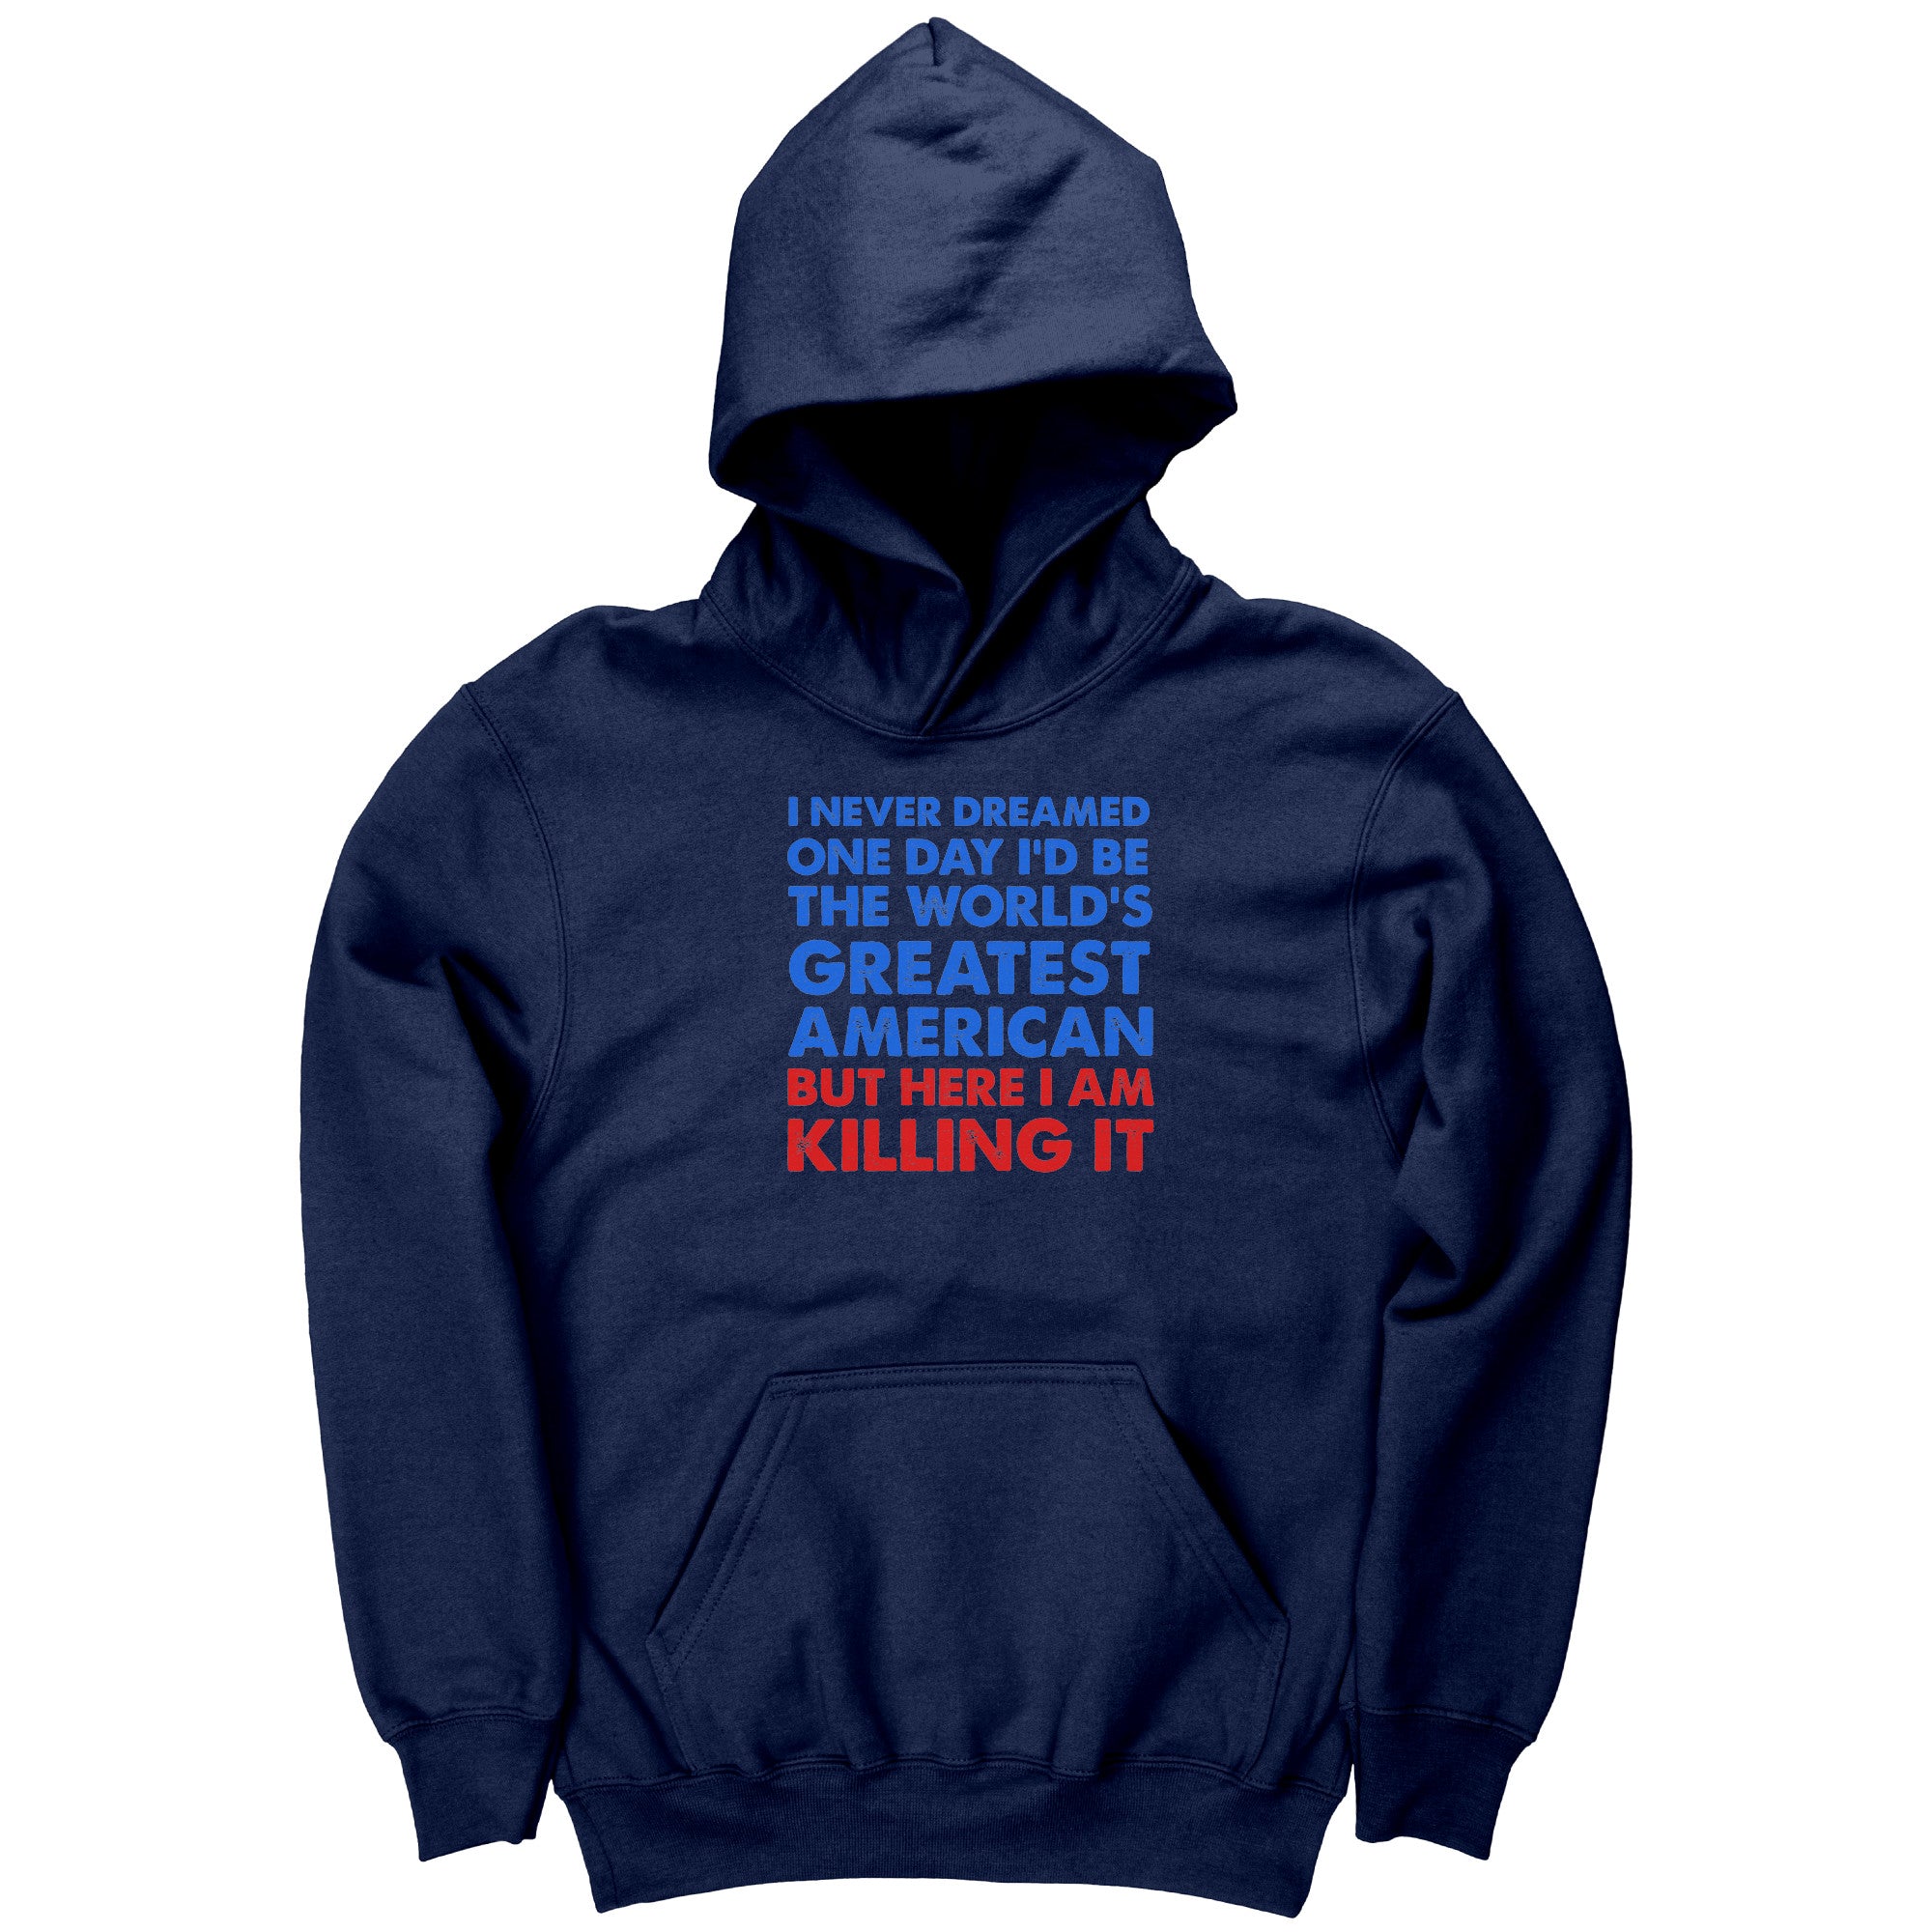 I Never Dreamed One Day I'd Be The World's Greatest American But Here I Am Killing It (Kids) -Apparel | Drunk America 